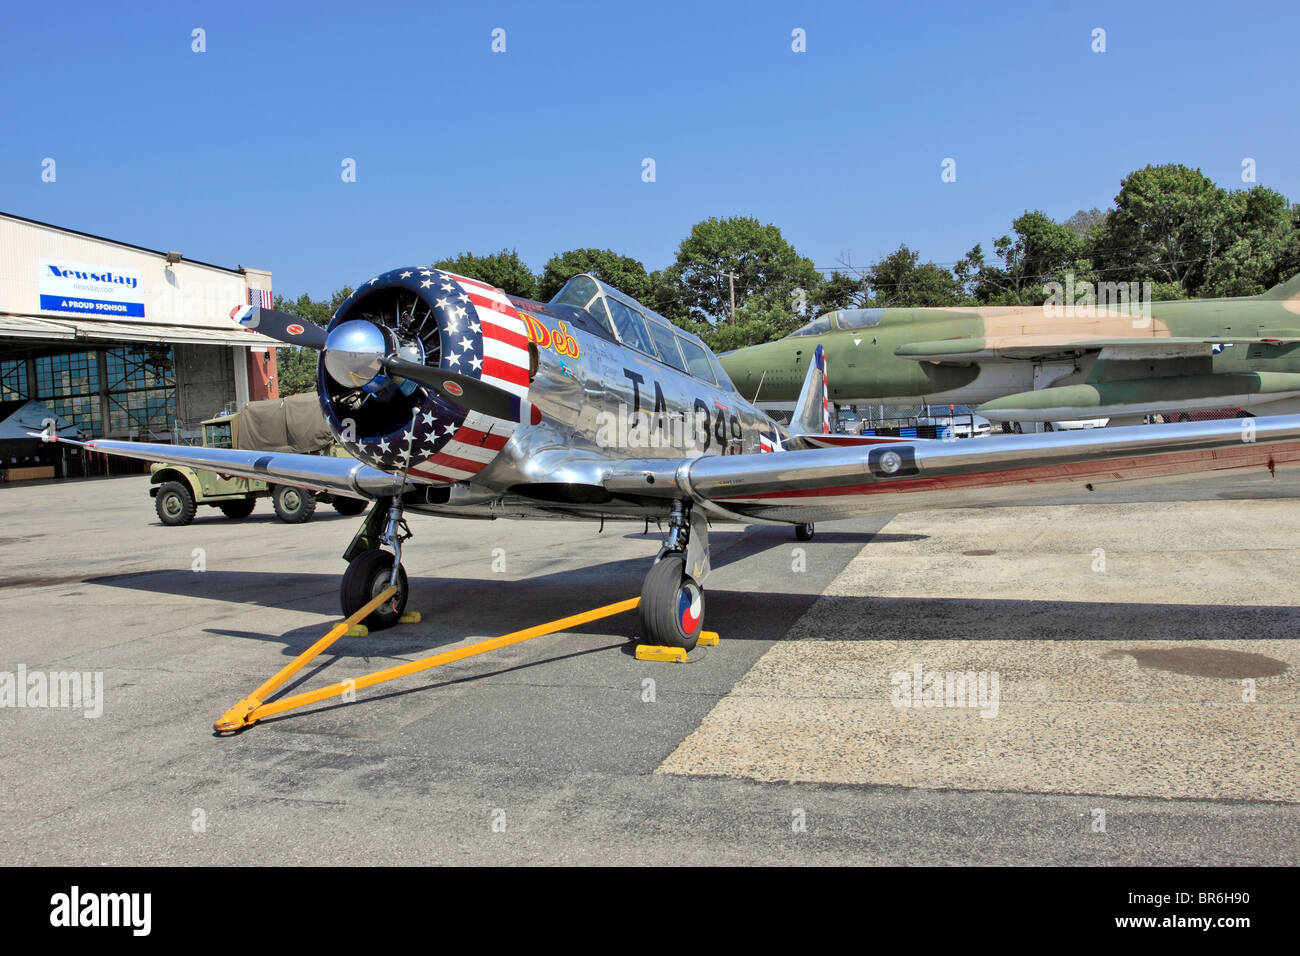 North American T-6 Texan WWII trainer American Airpower Museum Republic AIrport Farmingdale Long Island NY Stock Photo